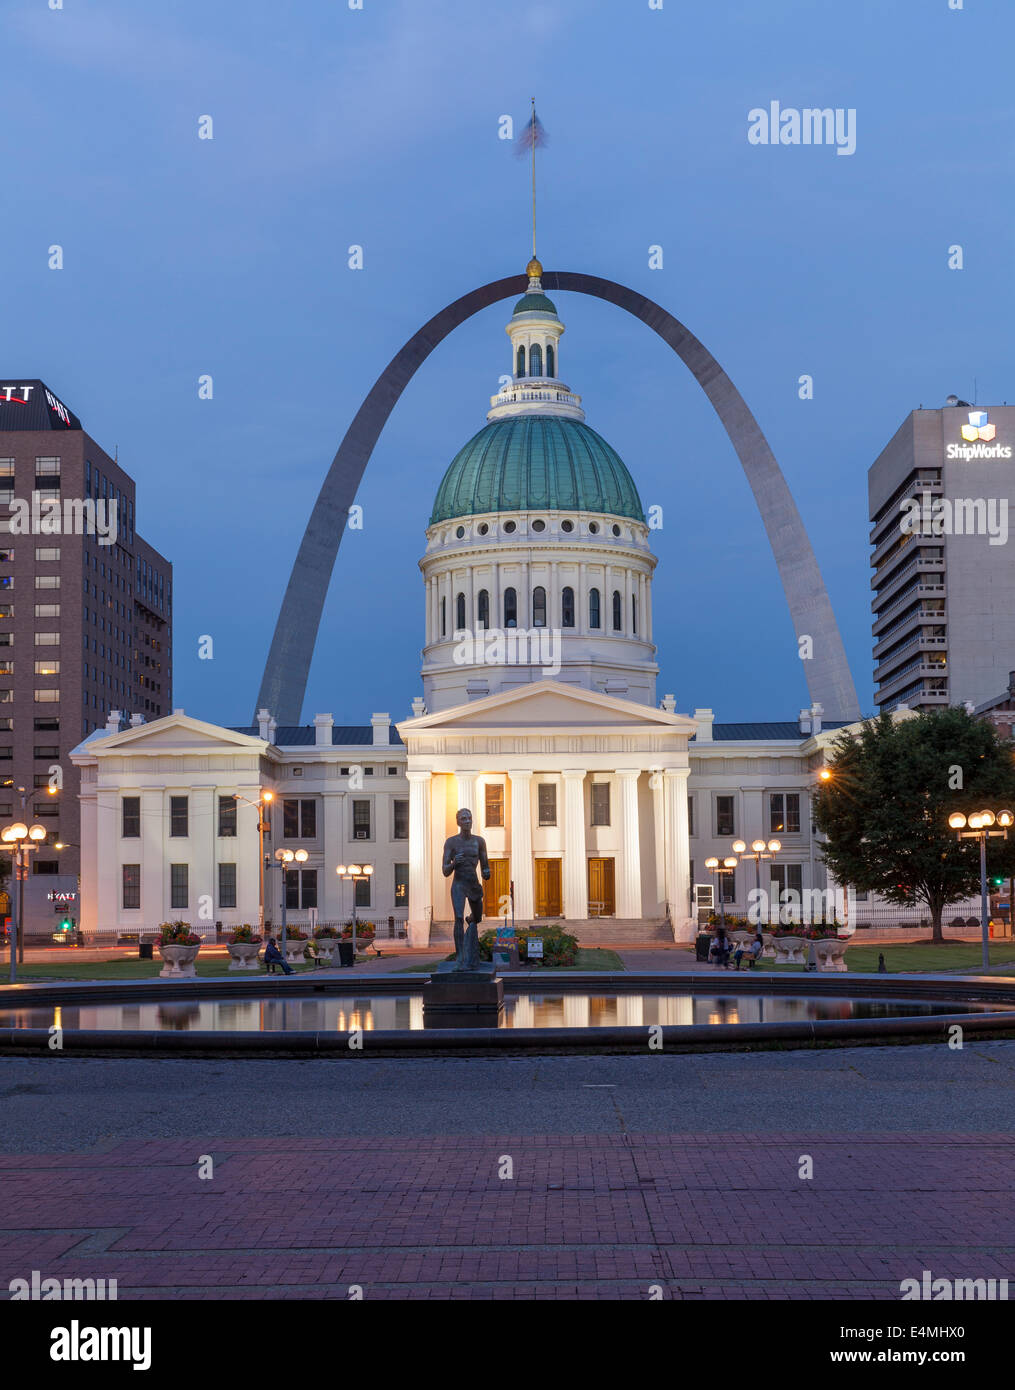 Night view of the Gateway to the West Arch monument in St Louis Missouri behind the green domed court room building Stock Photo